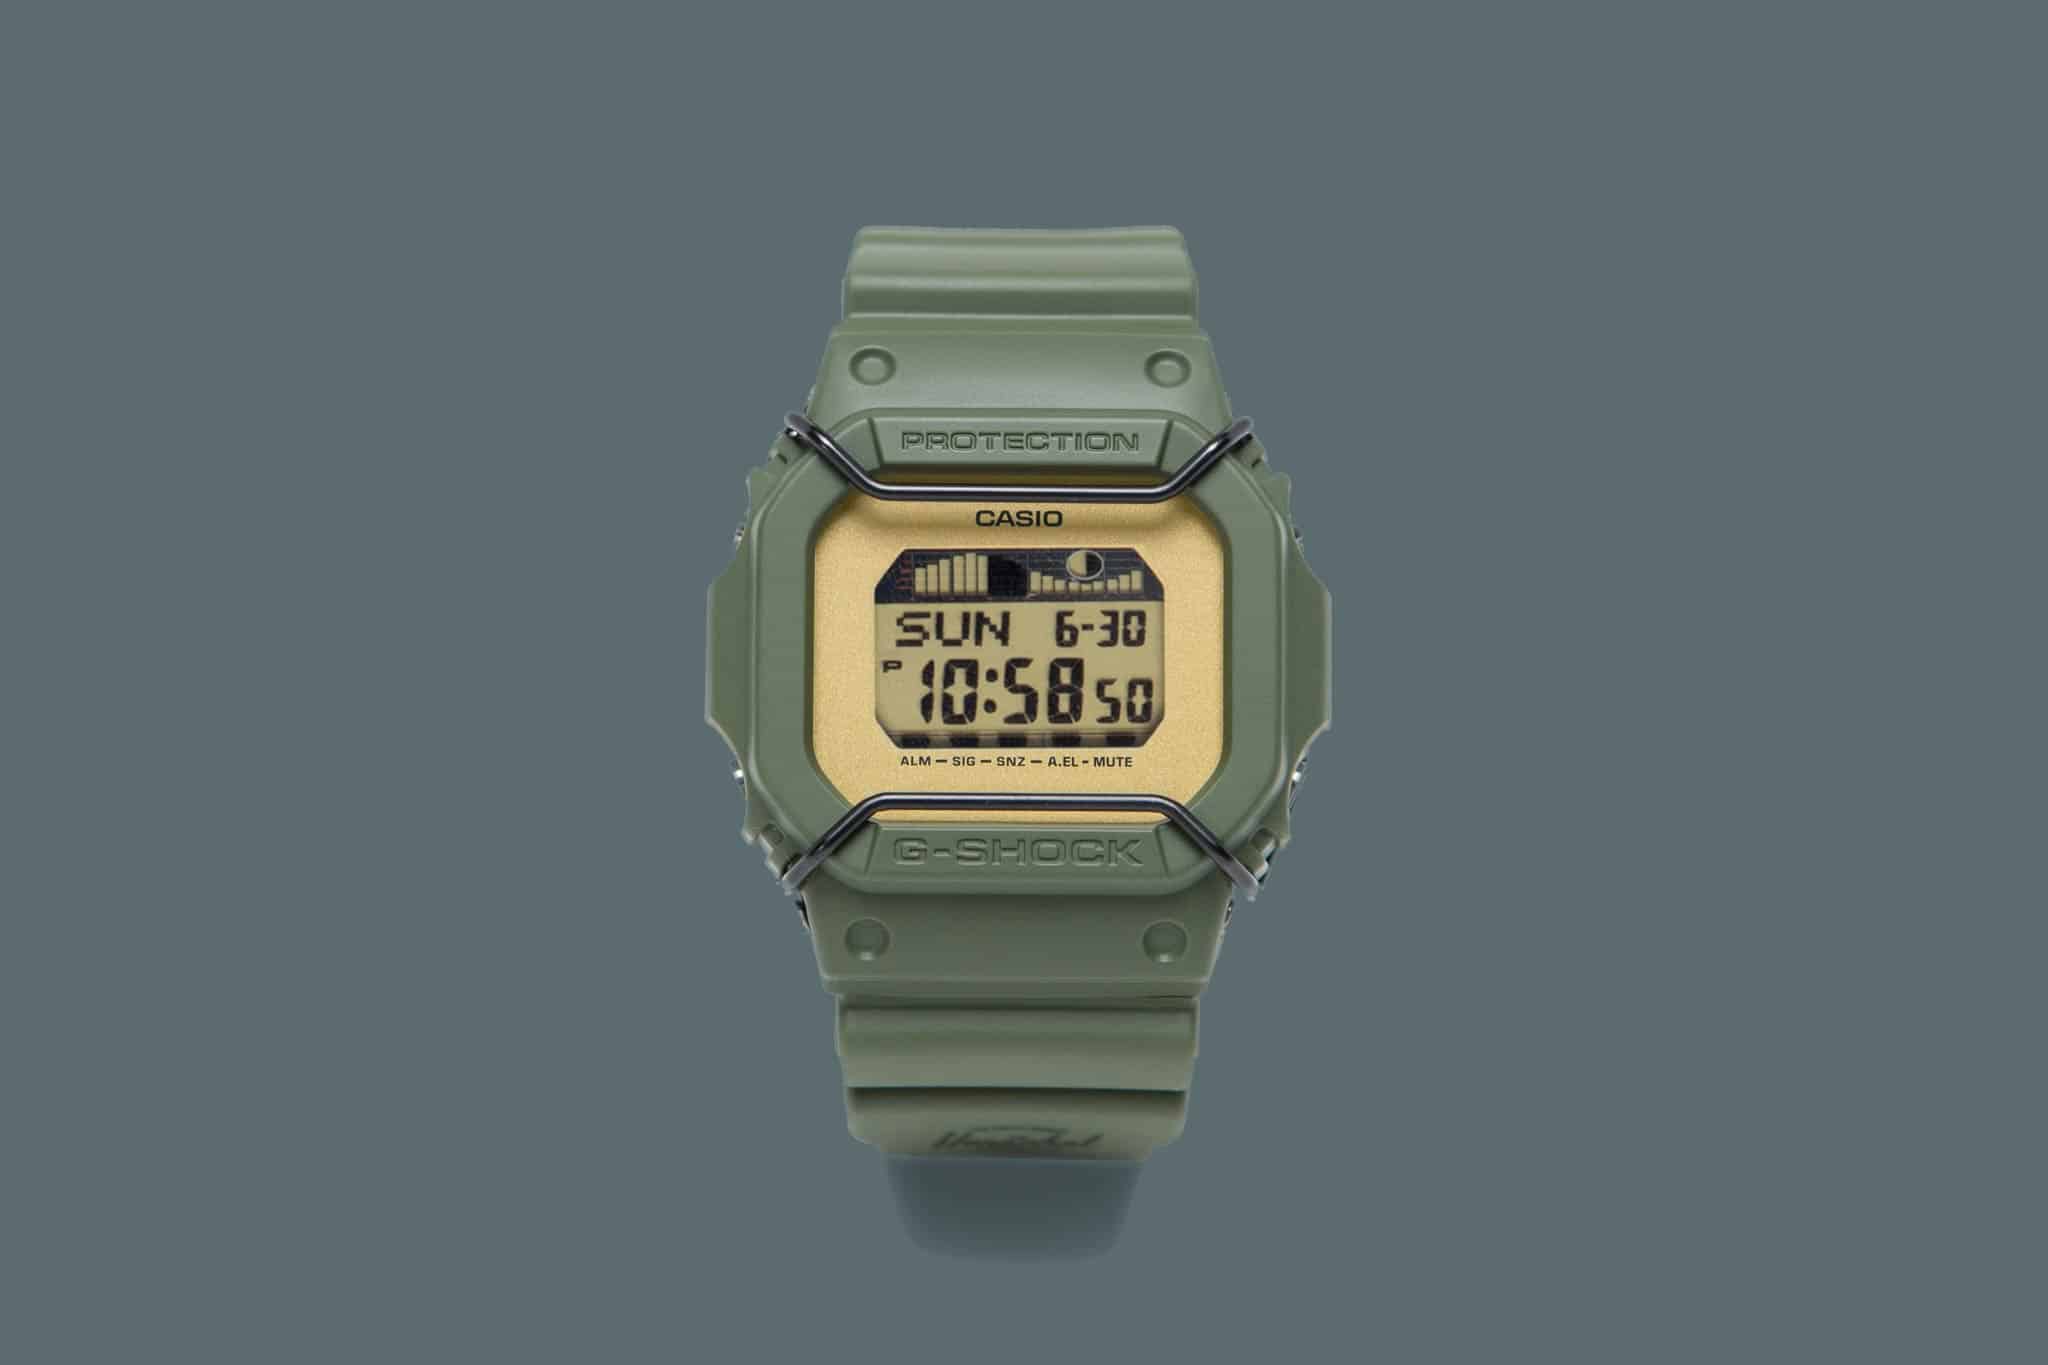 Introducing The Hsc G Lide A G Shock Made In Partnership With Herschel Supply Company Worn Wound